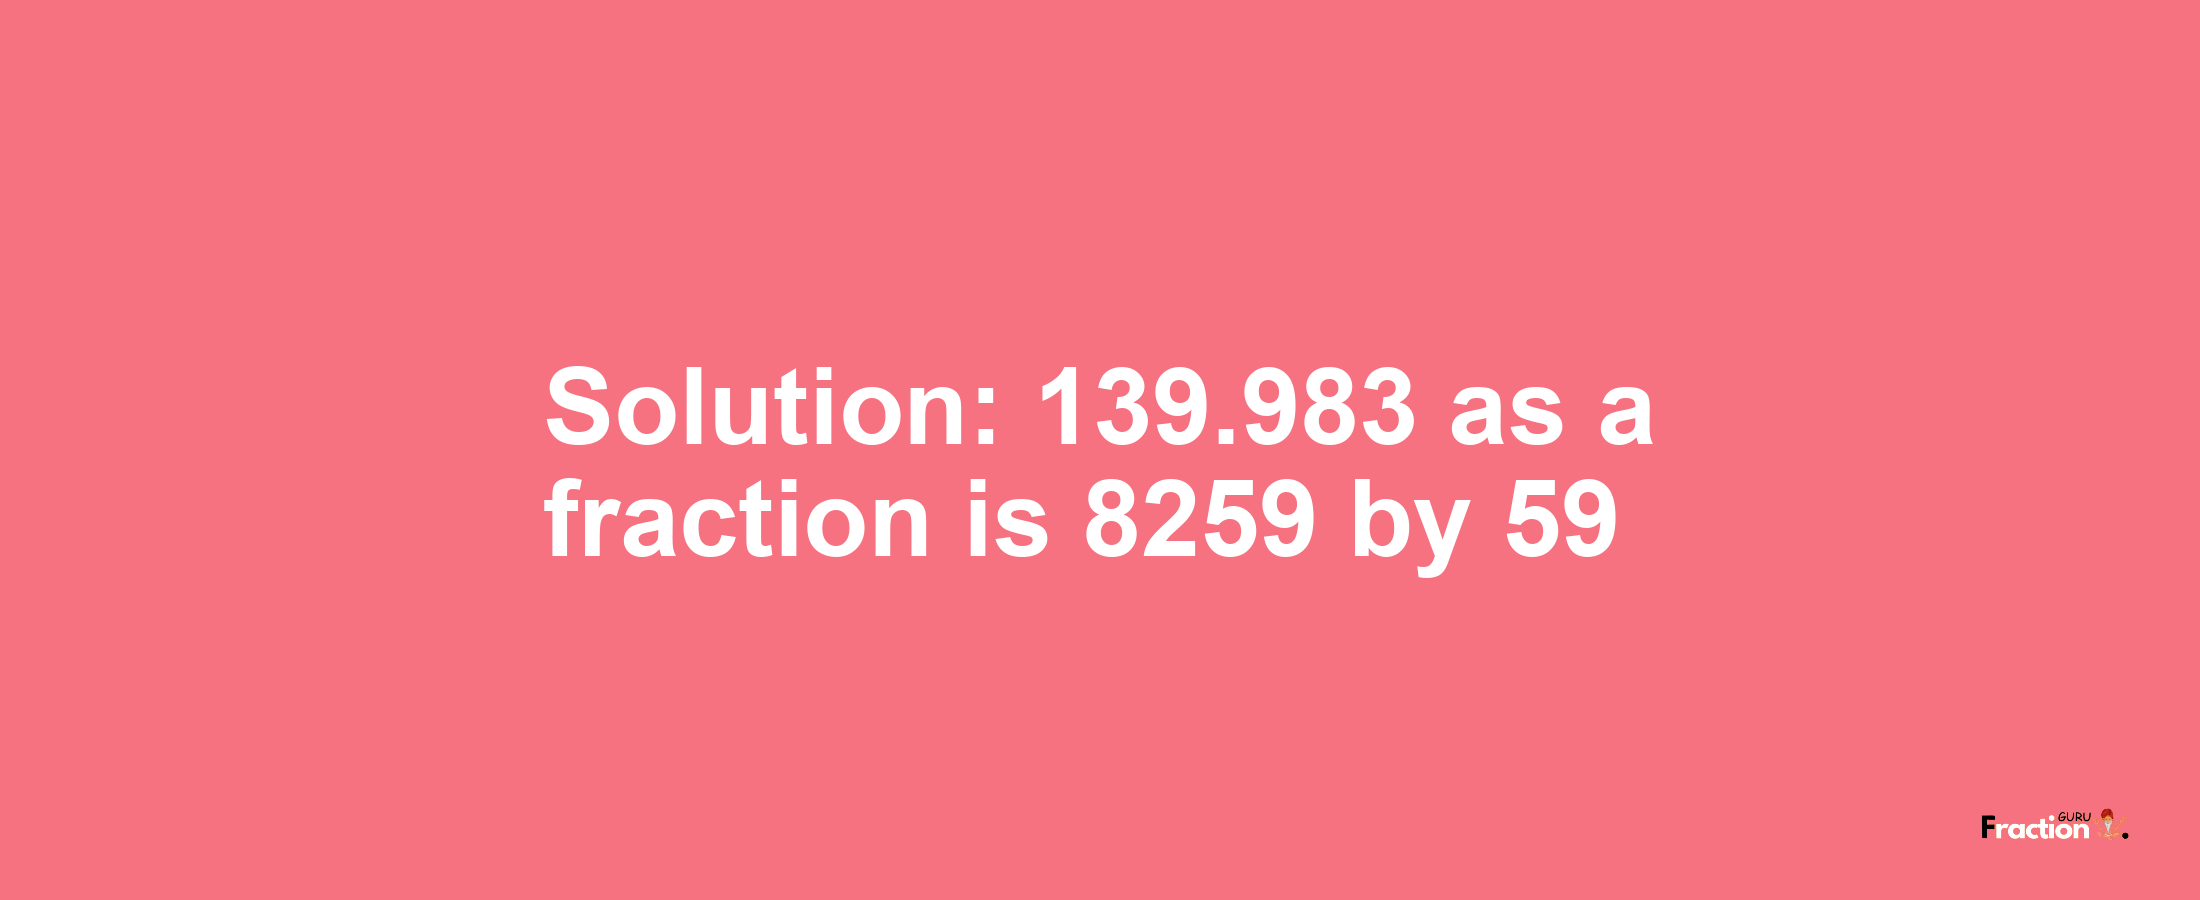 Solution:139.983 as a fraction is 8259/59